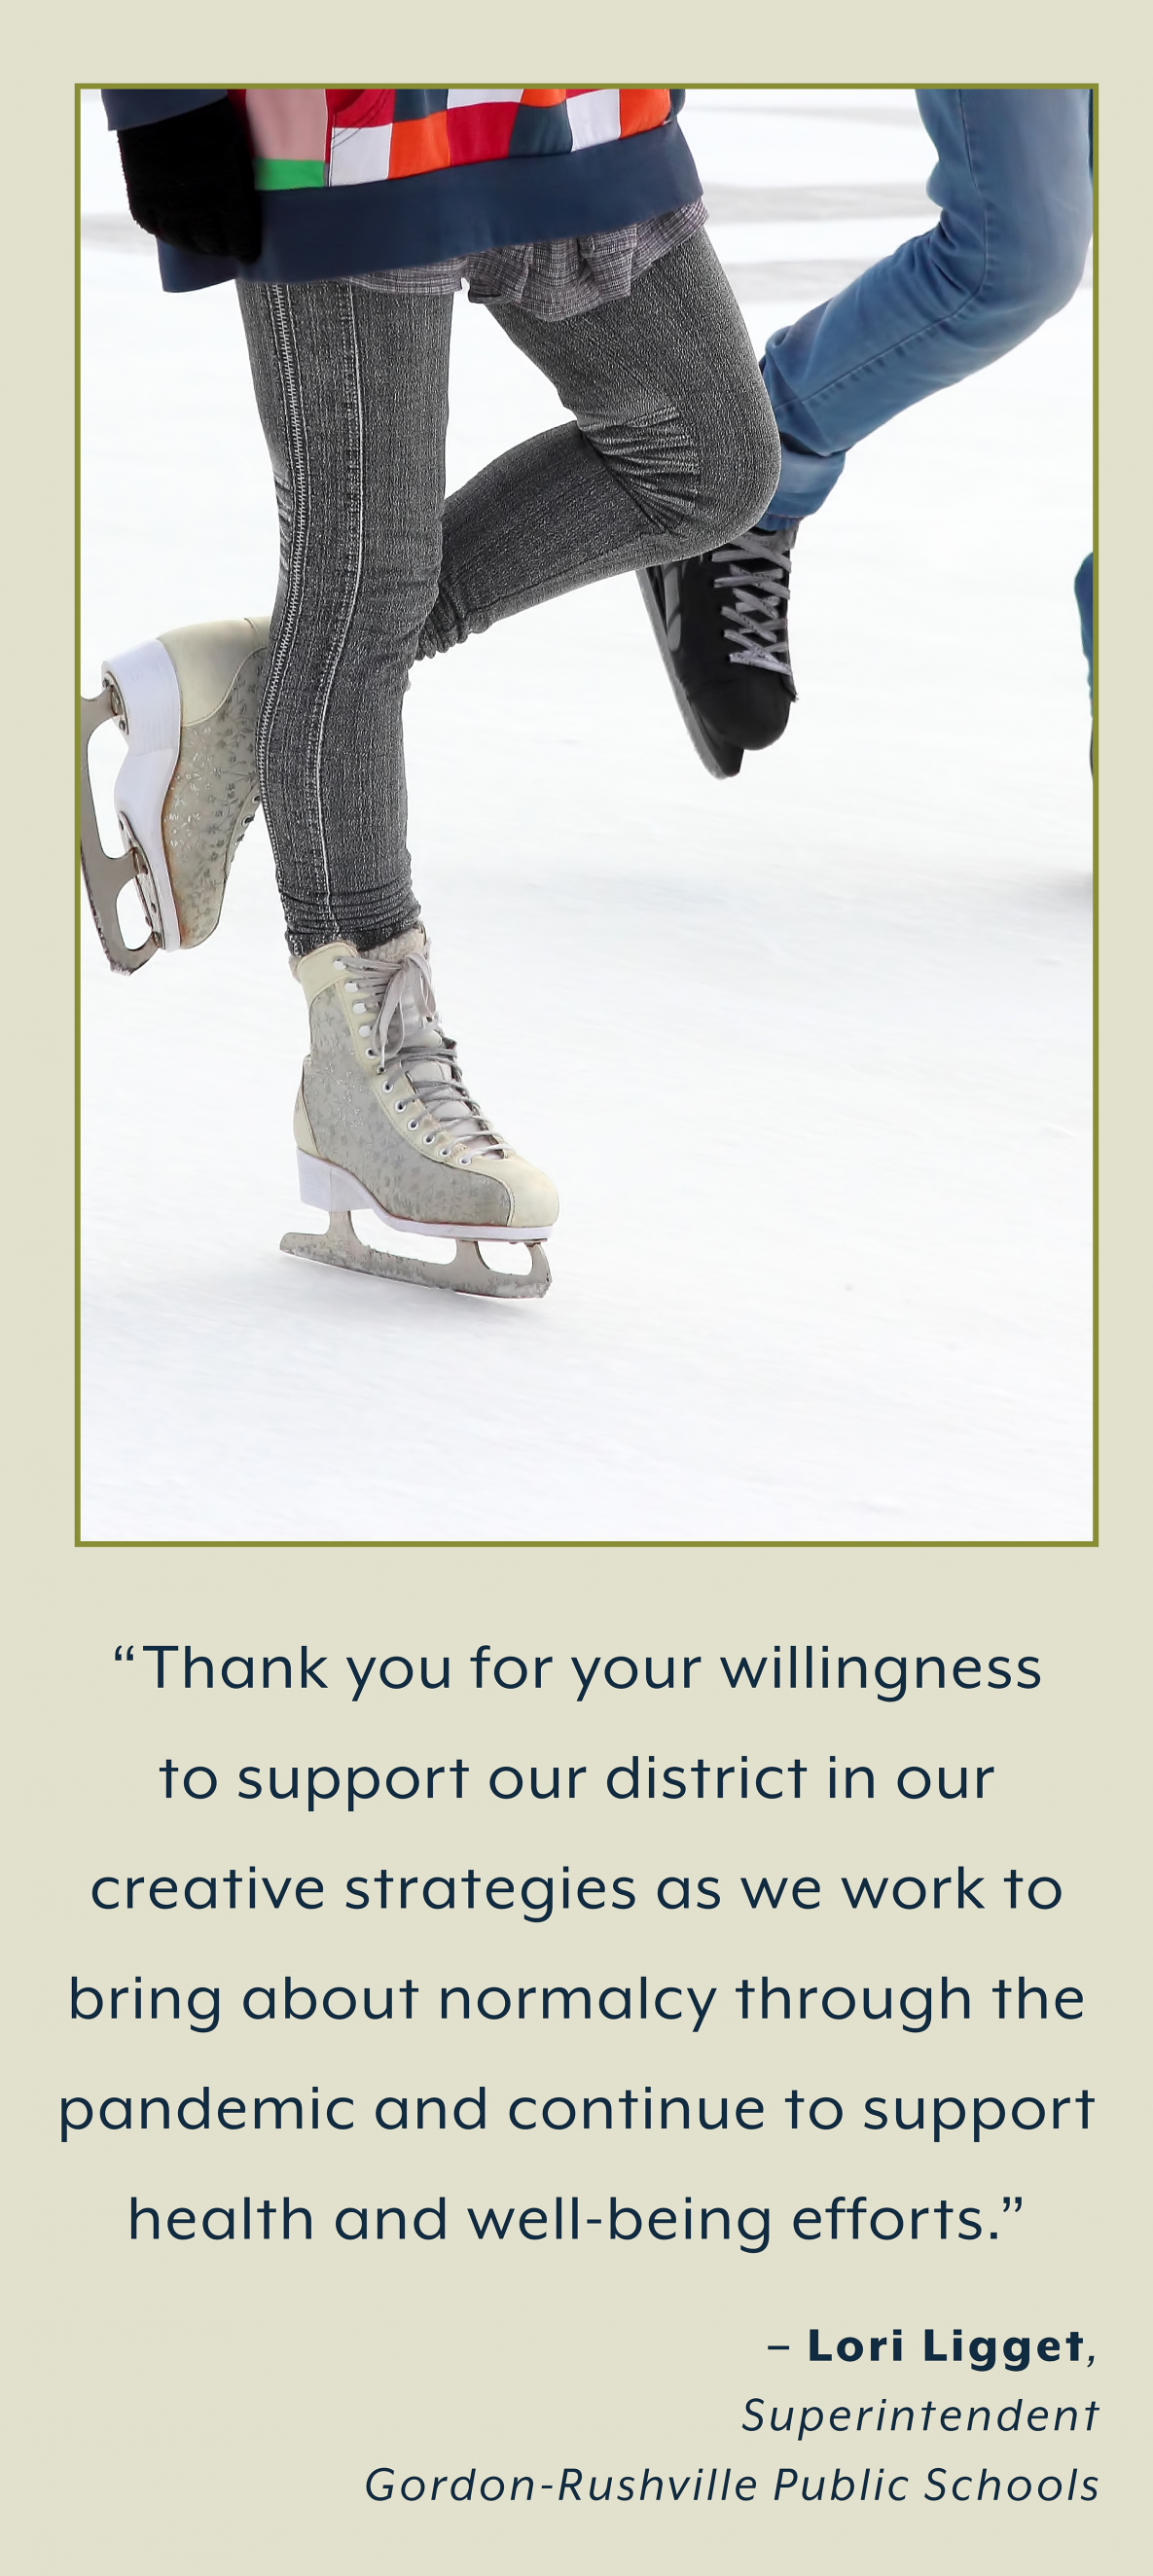 students ice skating and quote. “Thank you for your willingness  to support our district in our  creative strategies as we work to  bring about normalcy through the  pandemic and continue to support  health and well-being efforts.”  – Lori Ligget,  Superintendent  Gordon-Rushville Public Schools